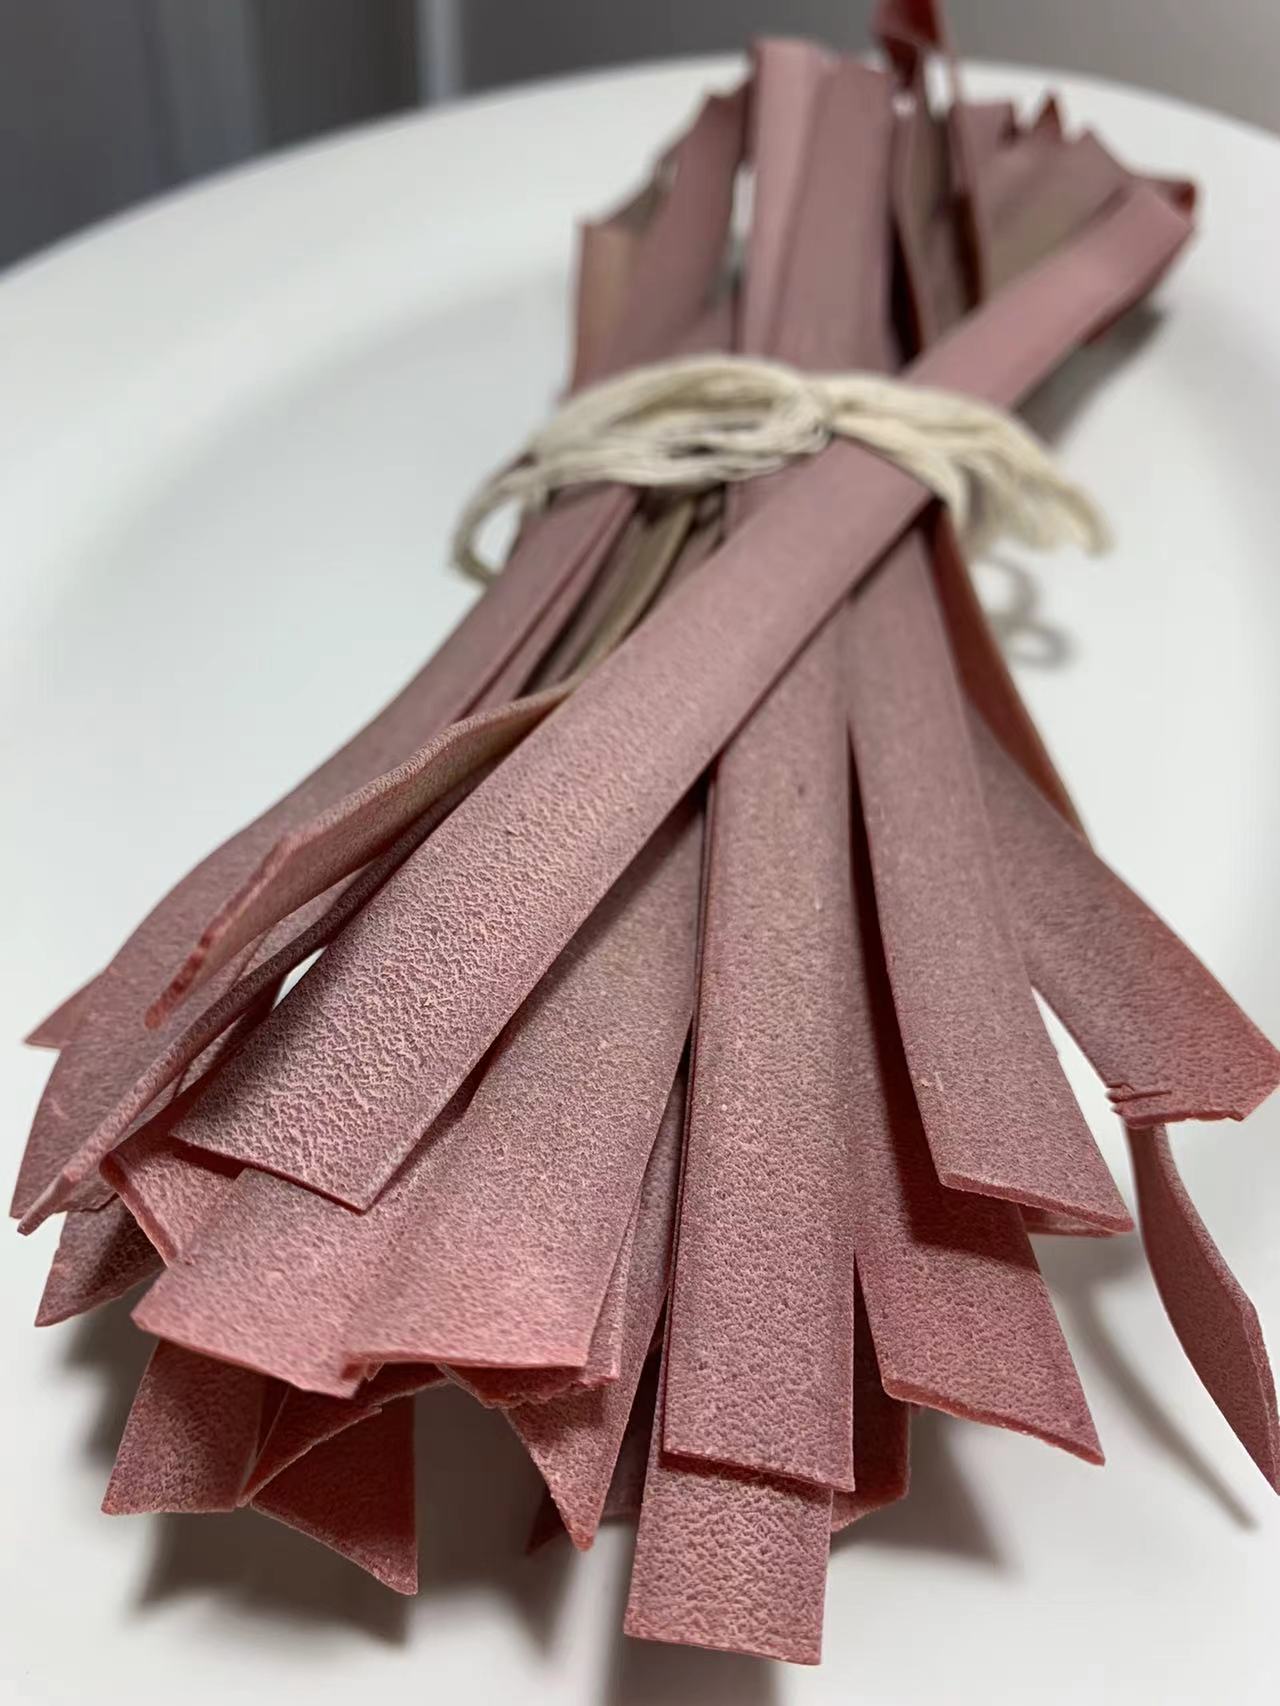 Beetroot Pappardelle